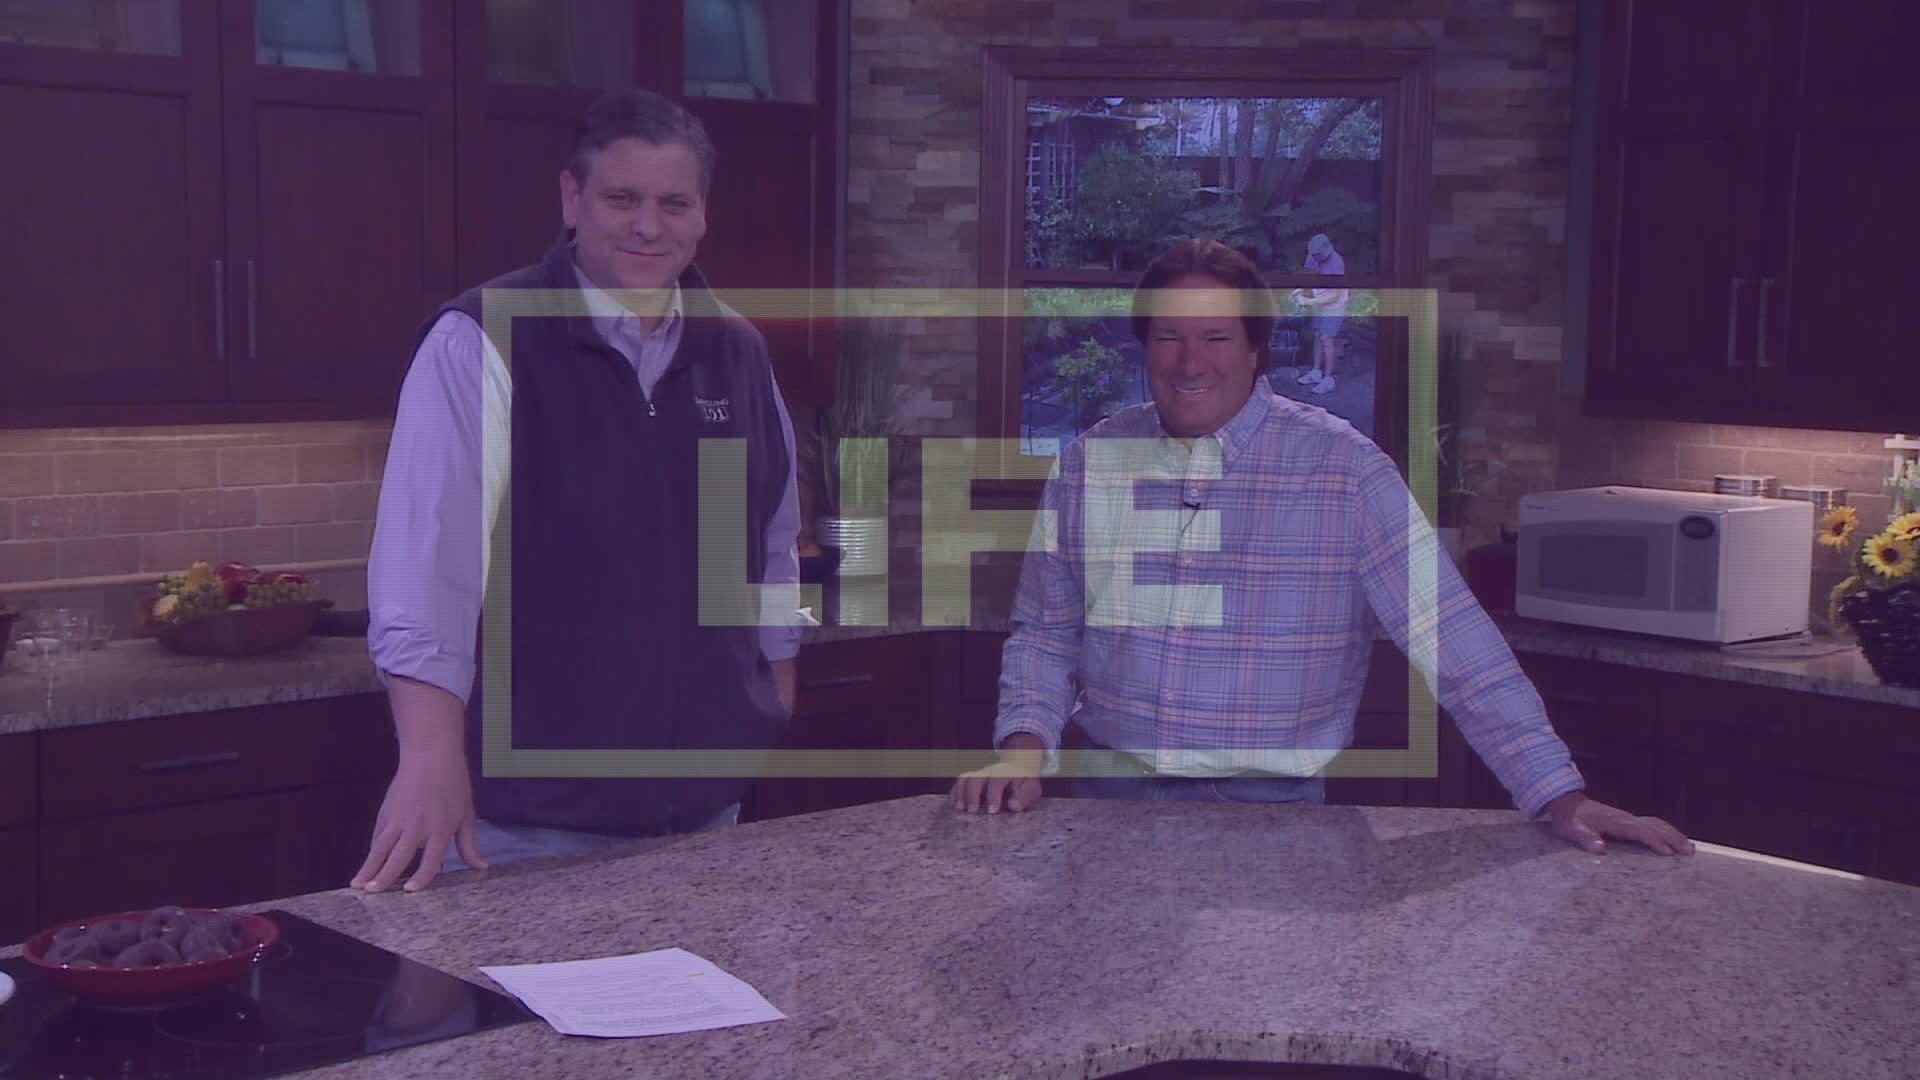 Tom Garcia and Scott Silknitter are back with advice on how to address you loved one who may be hiding valuables.